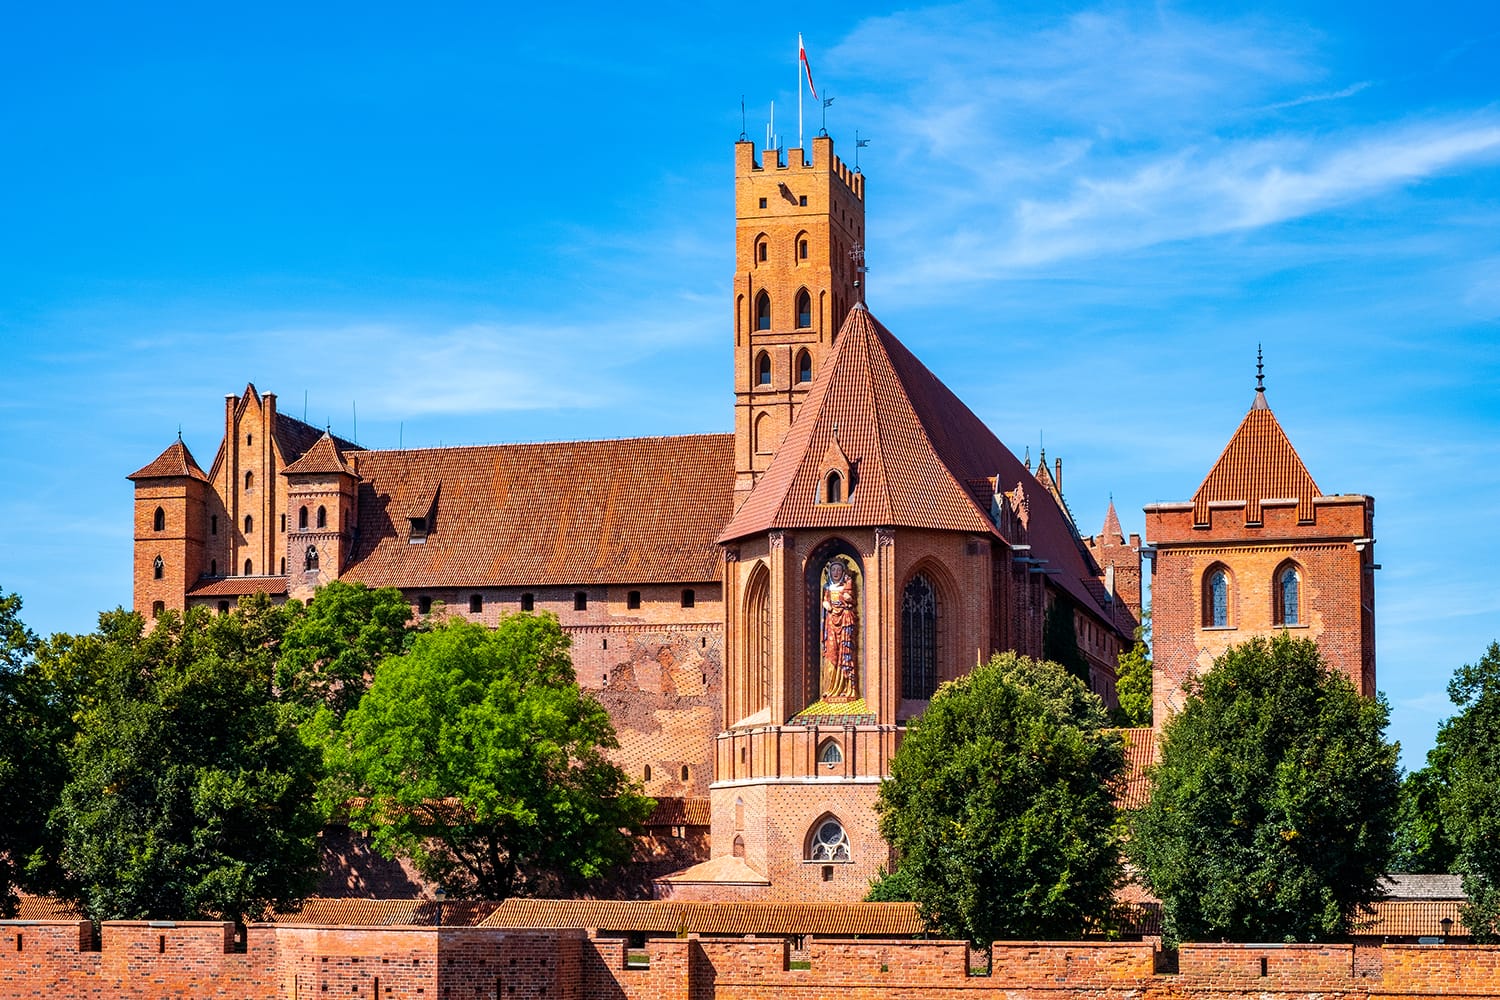 Panoramic view of the medieval Teutonic Order Castle in Malbork, Poland - High Castle and St. Mary church